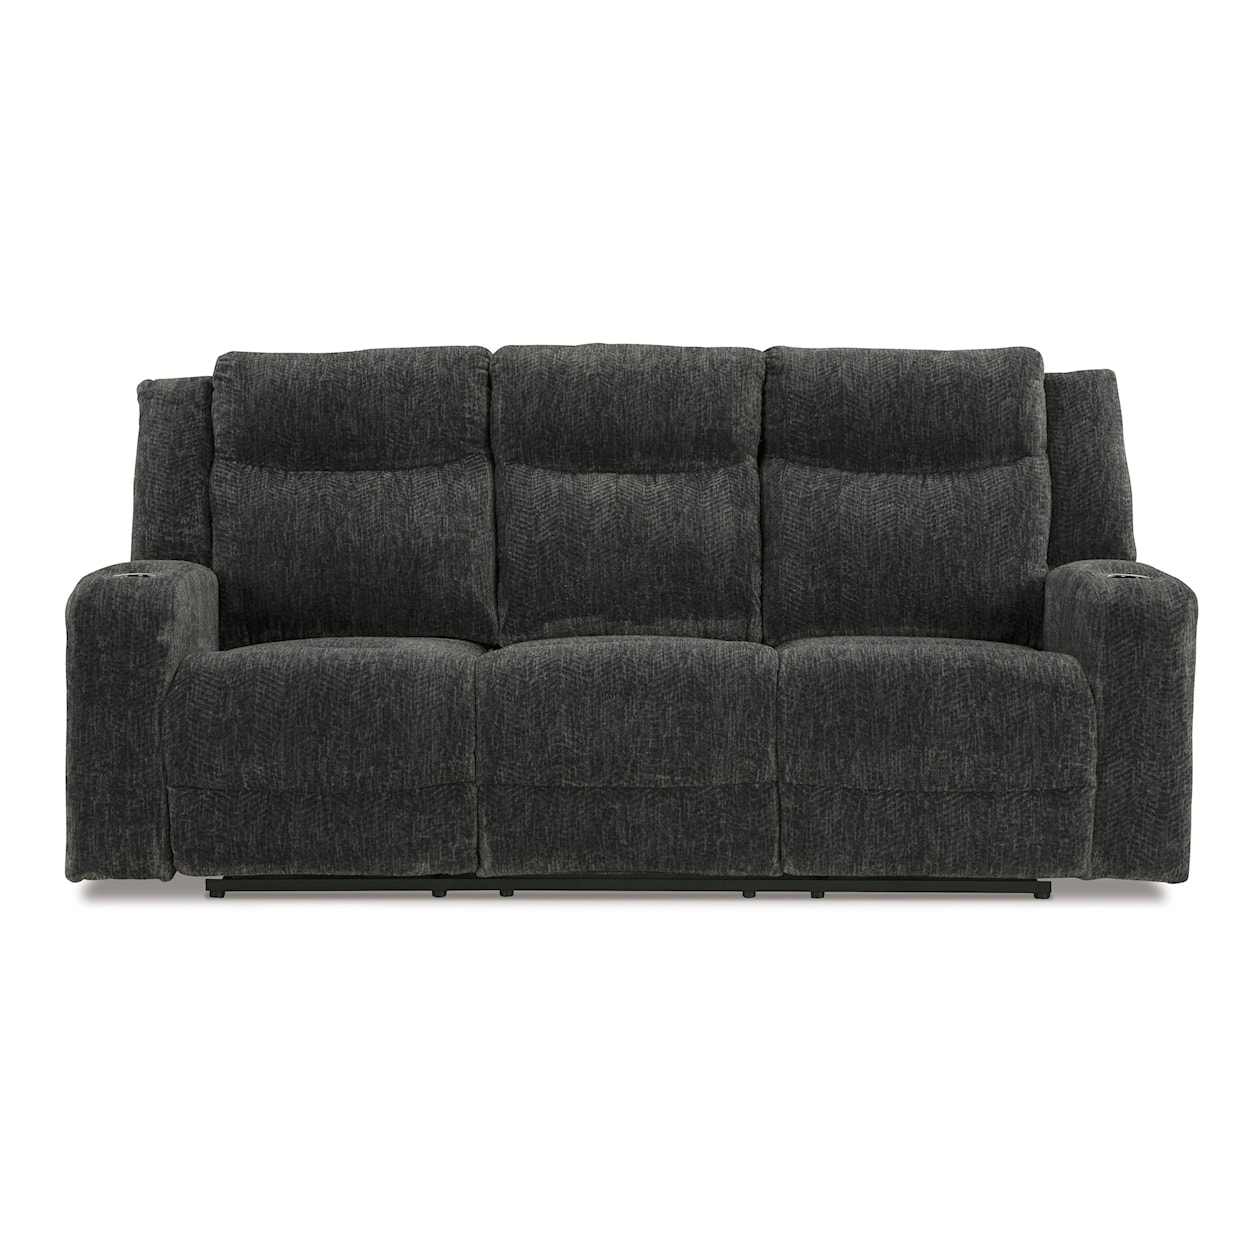 Signature Design by Ashley Martinglenn Power Reclining Sofa with Drop Down Table